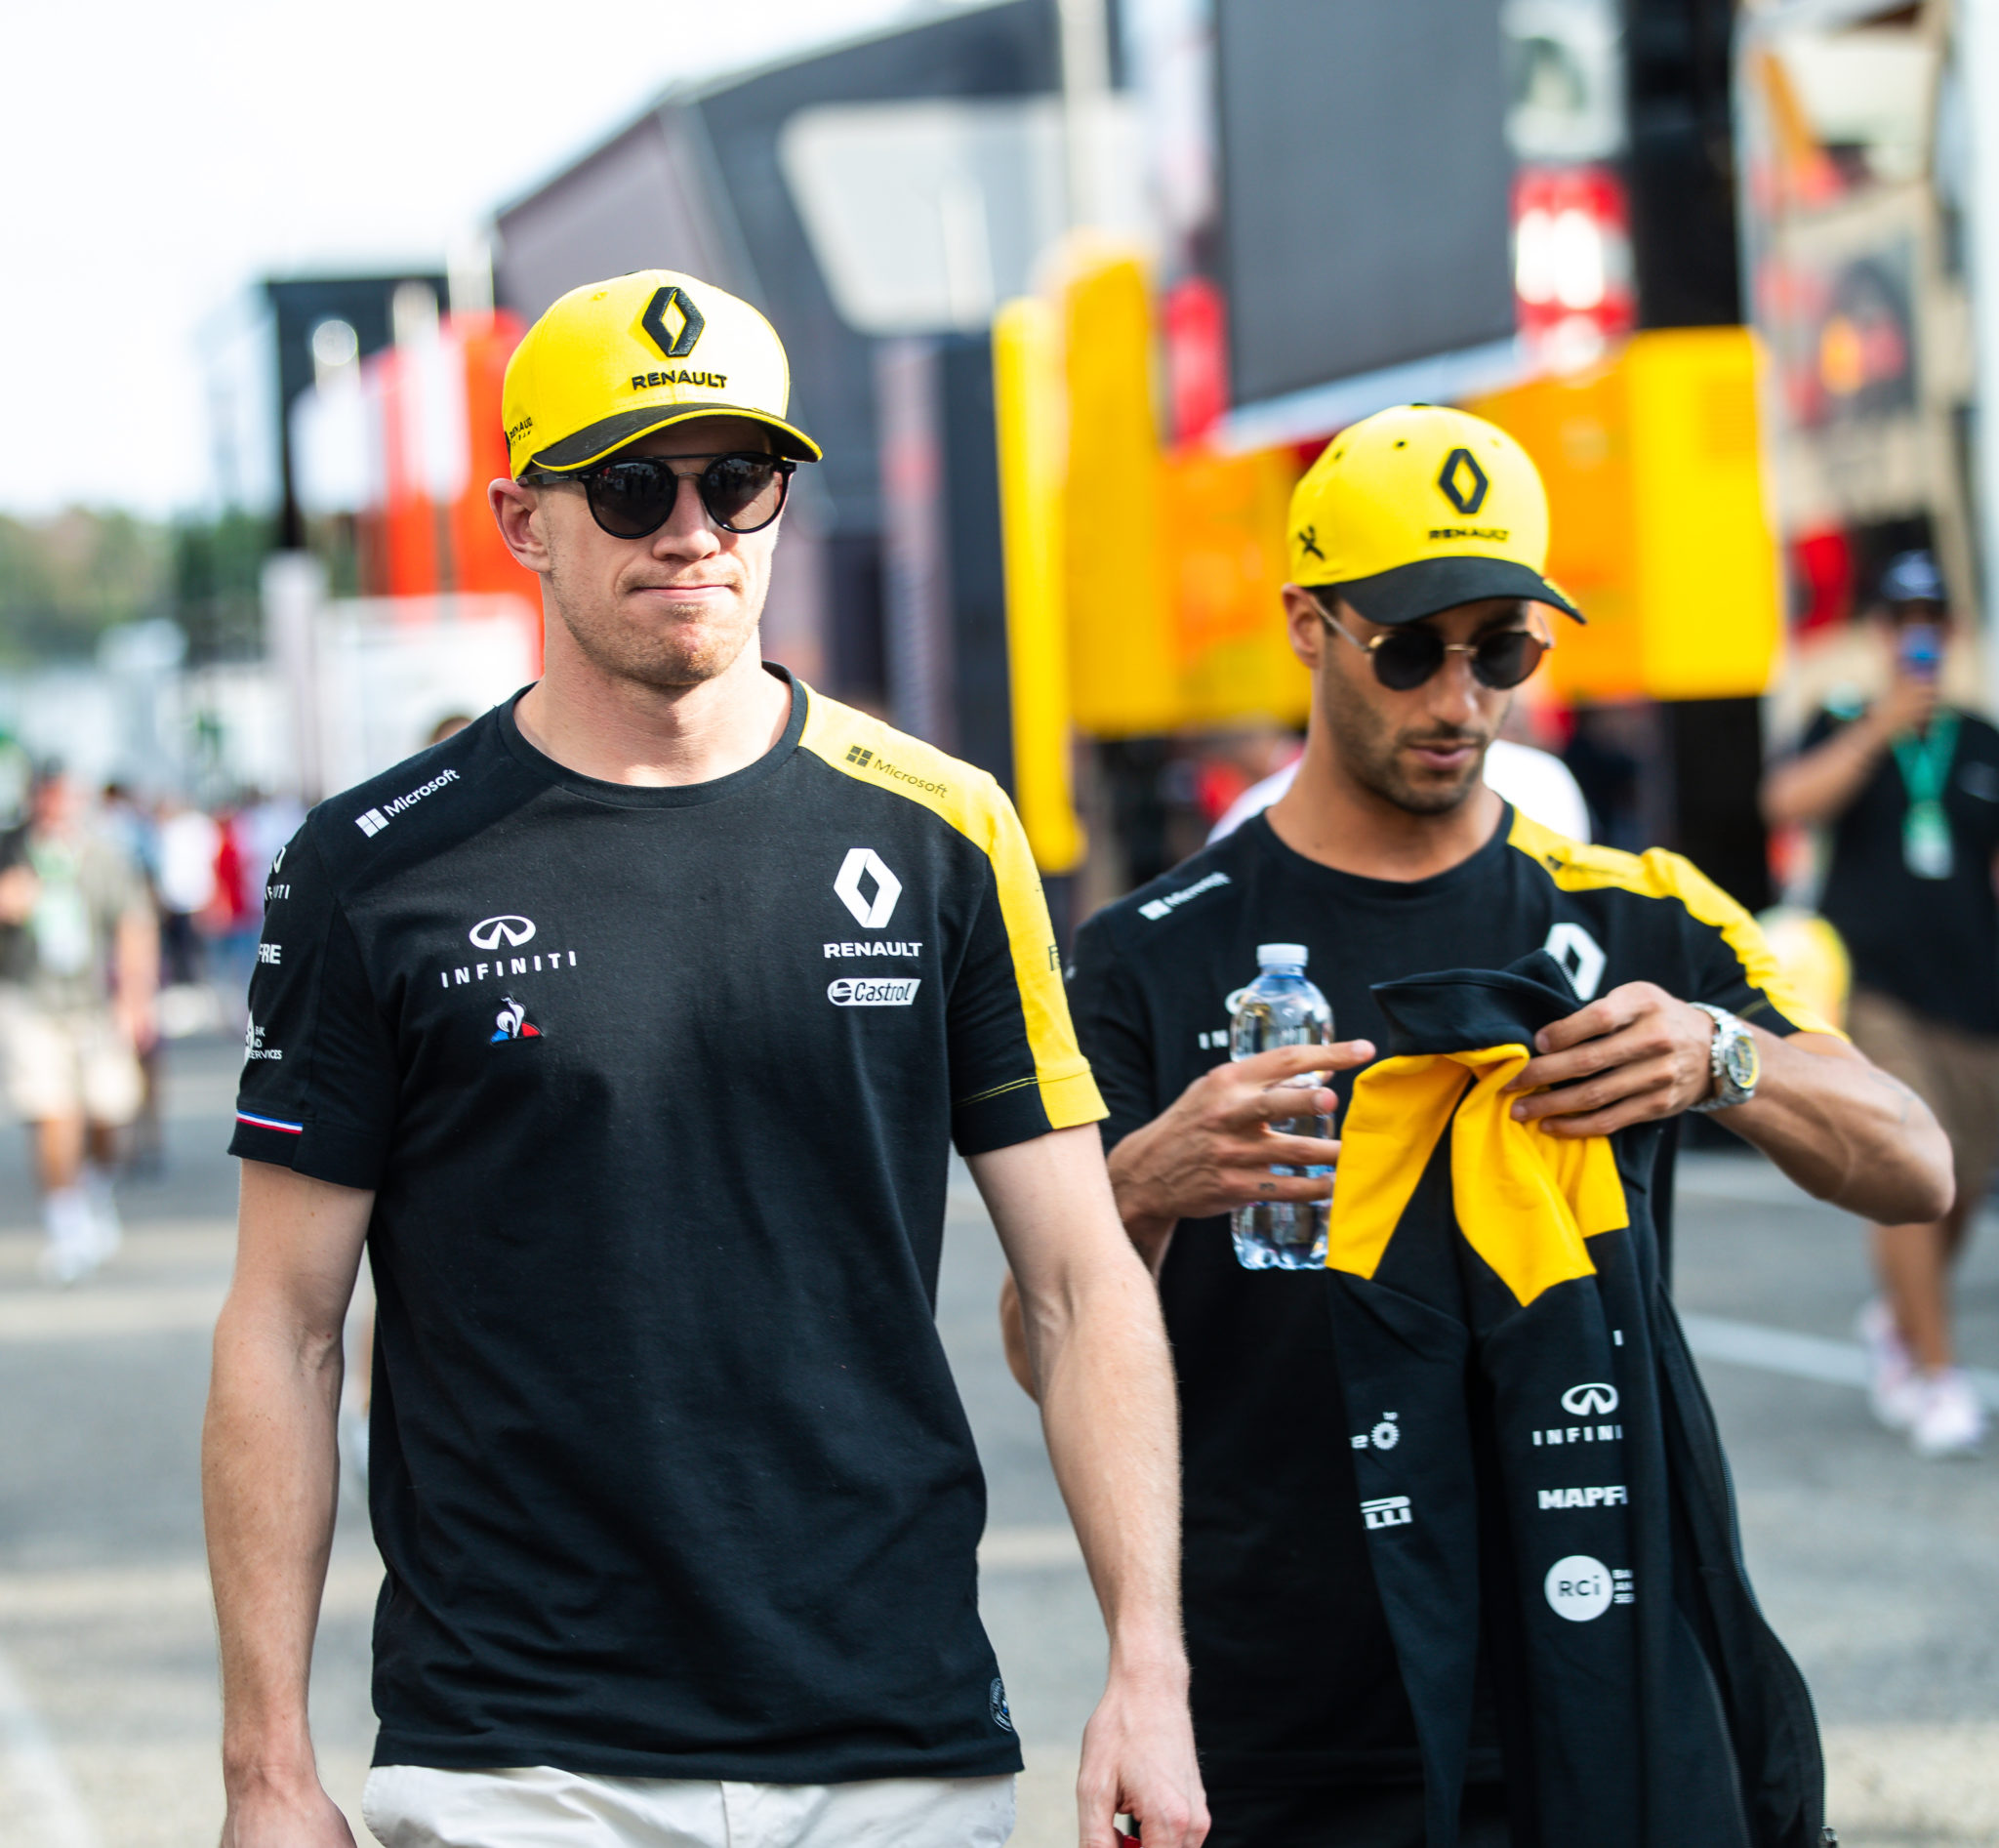 Everything you need to know about F1's Nico Hulkenberg! - Kym Illman